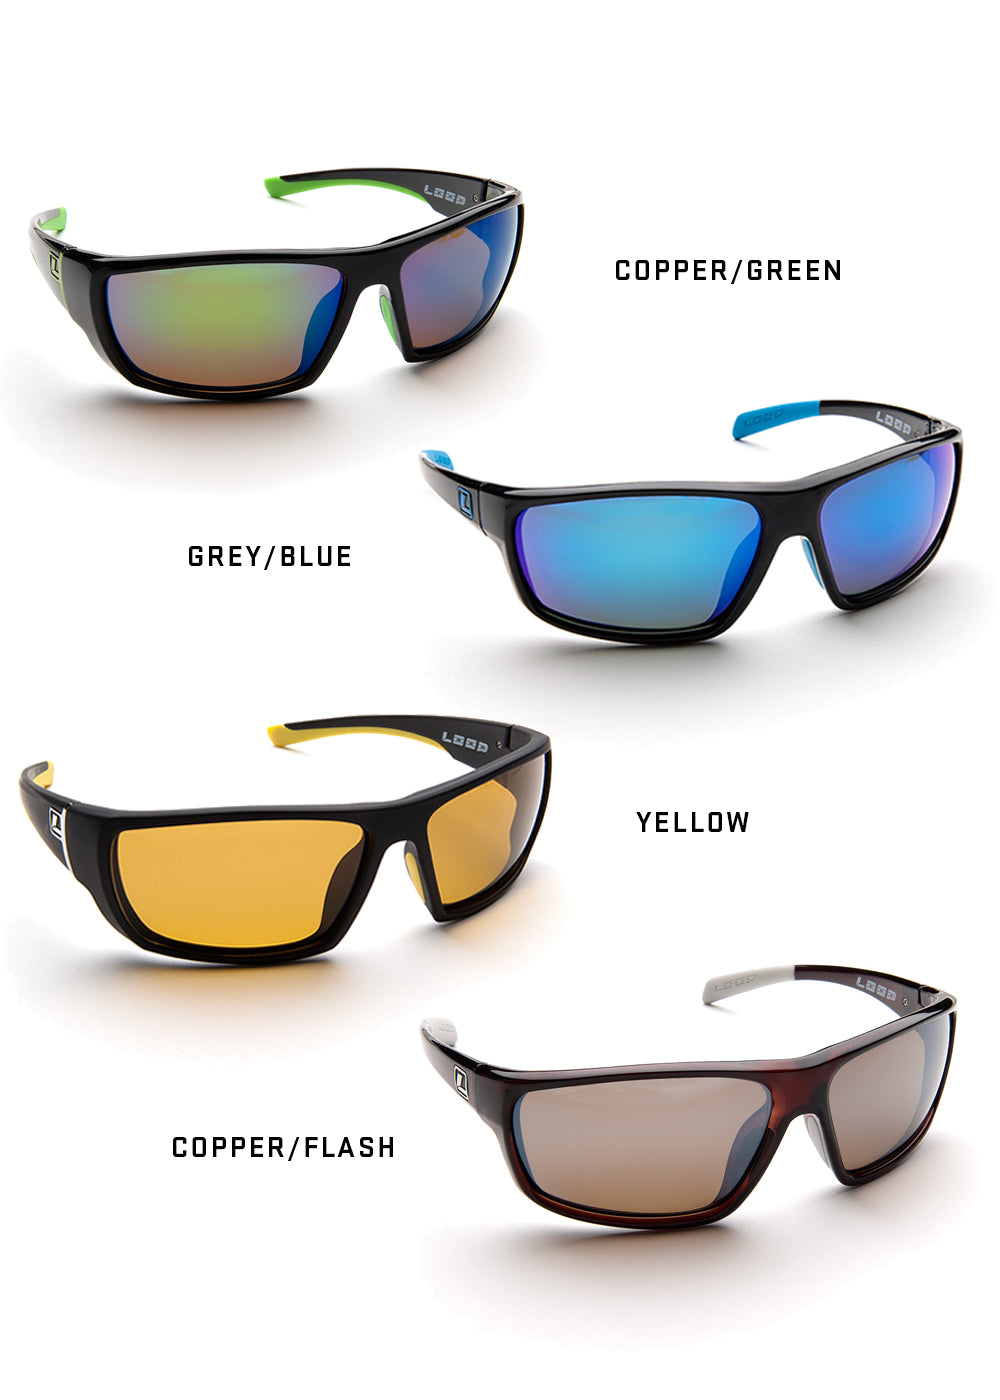 Fly Fishing Sunglasses: How To Choose a Lens Color 